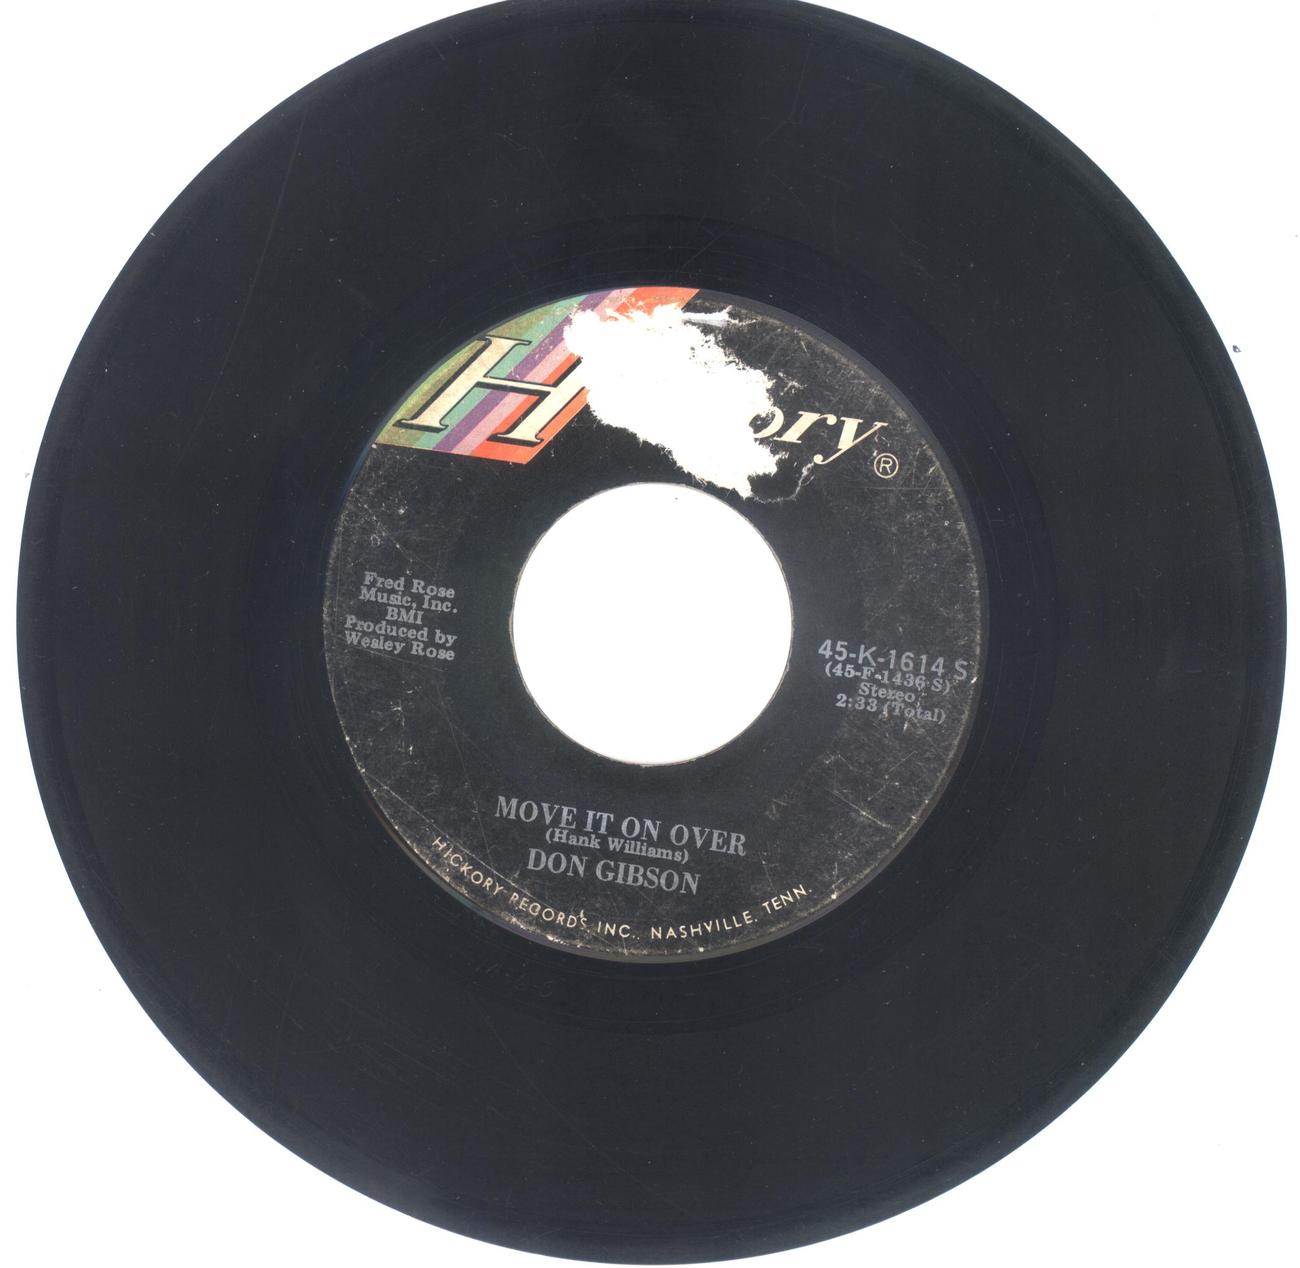 Don Gibson 45 rpm Move It On Over - Records